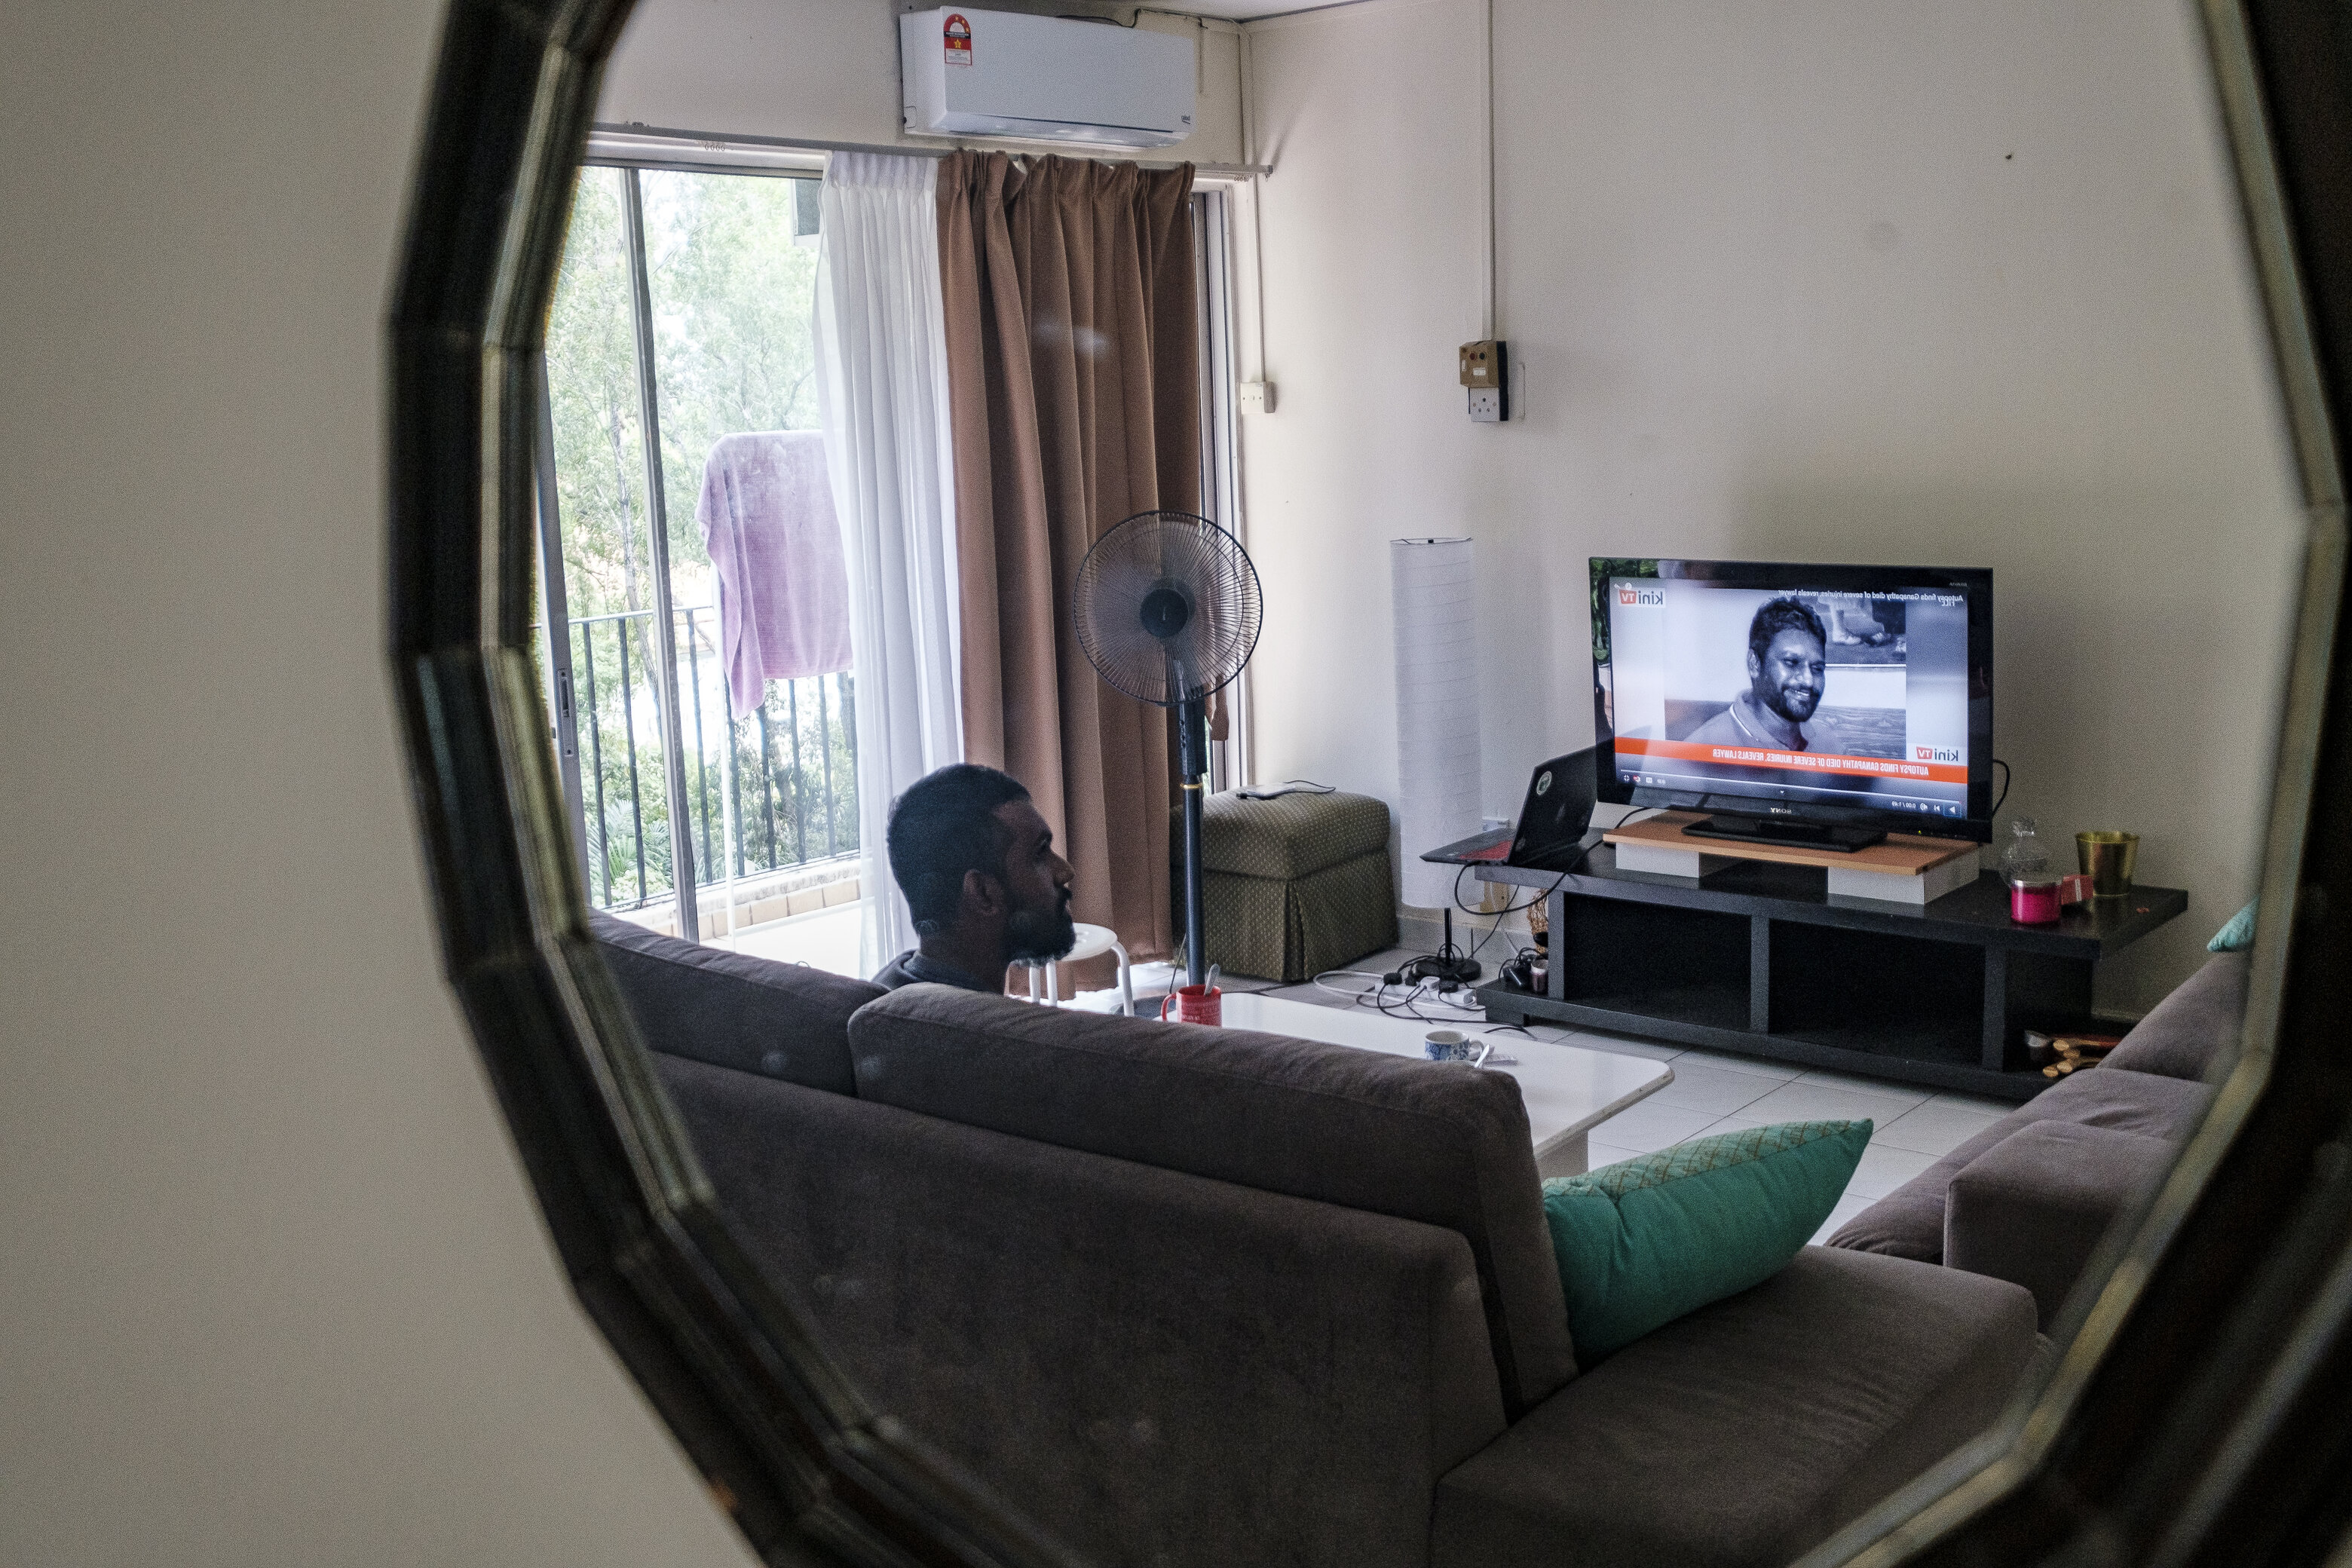 Pingalayen Kumar in his living room, watching media coverage of ongoing police brutality in the country​. Photo: Farhan Iqbal 